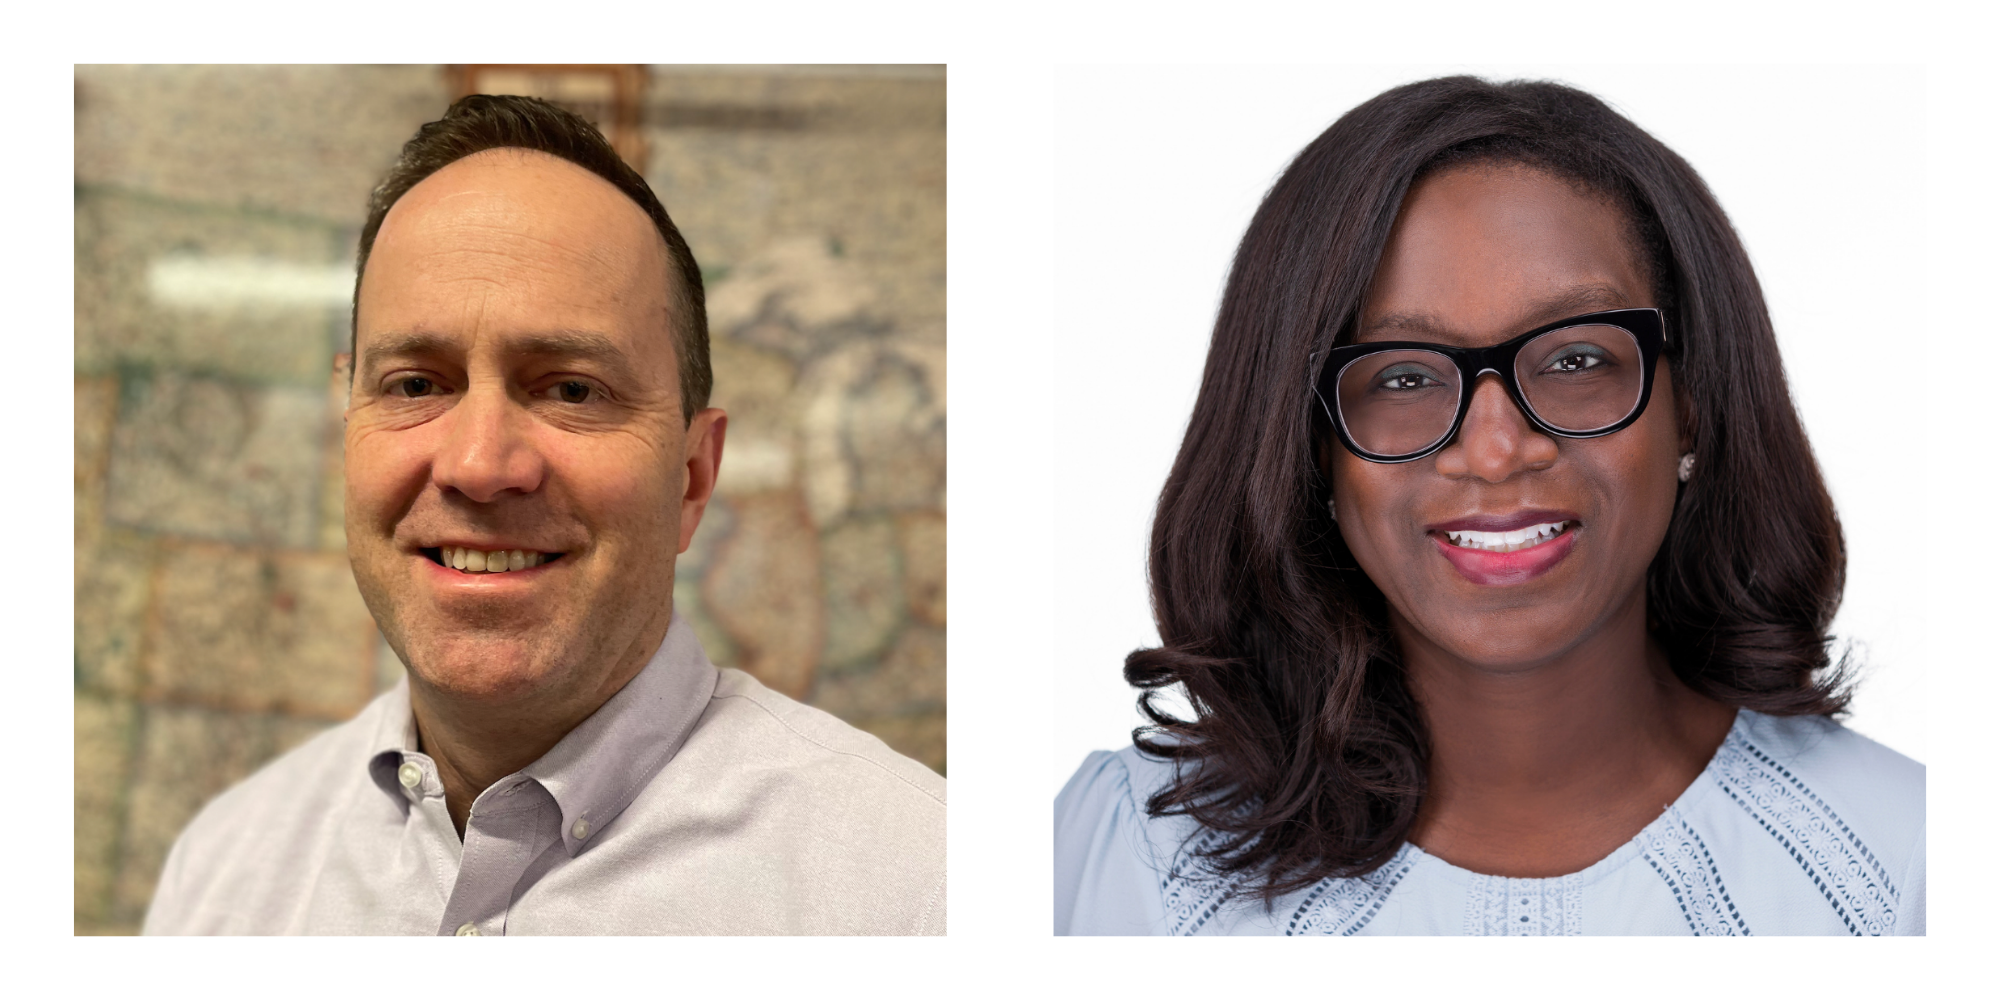 Todd Rendle, formerly of Avero, has joined as Chief Financial Officer, and Harriet Ayoade, formerly of LeadingAgile, is now Vice President of Marketing at EverWash.